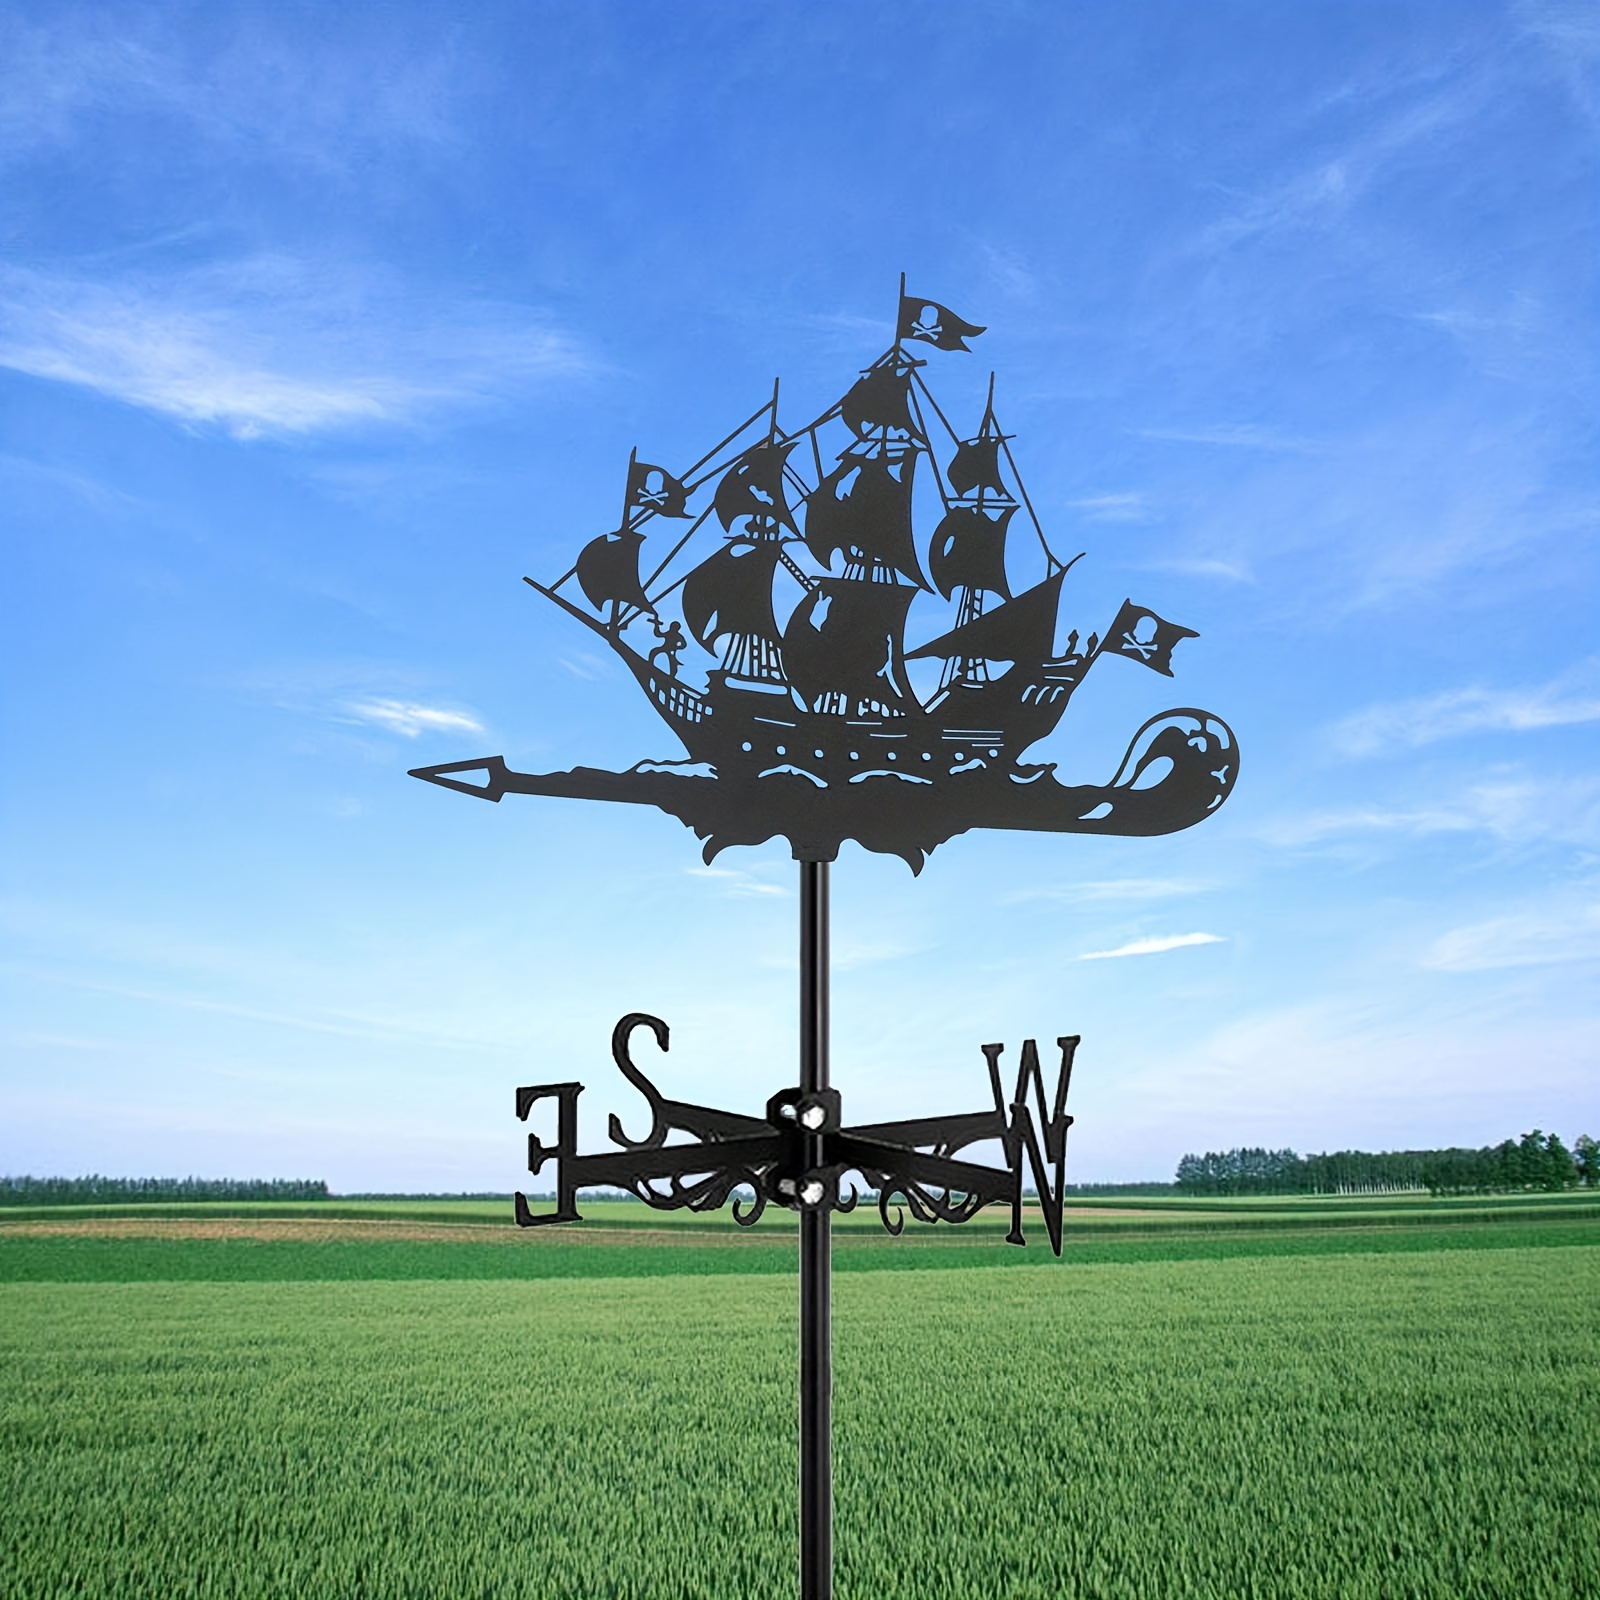 

1pc, New Metal Pirate Ship Weathervane, Vertical Decorative Roof Weathervane Garden Courtyard Decoration, Used For Roof Garden, Garden Shed, Home, Fence Post, Greenhouse, Barn Or Shed Weathervane